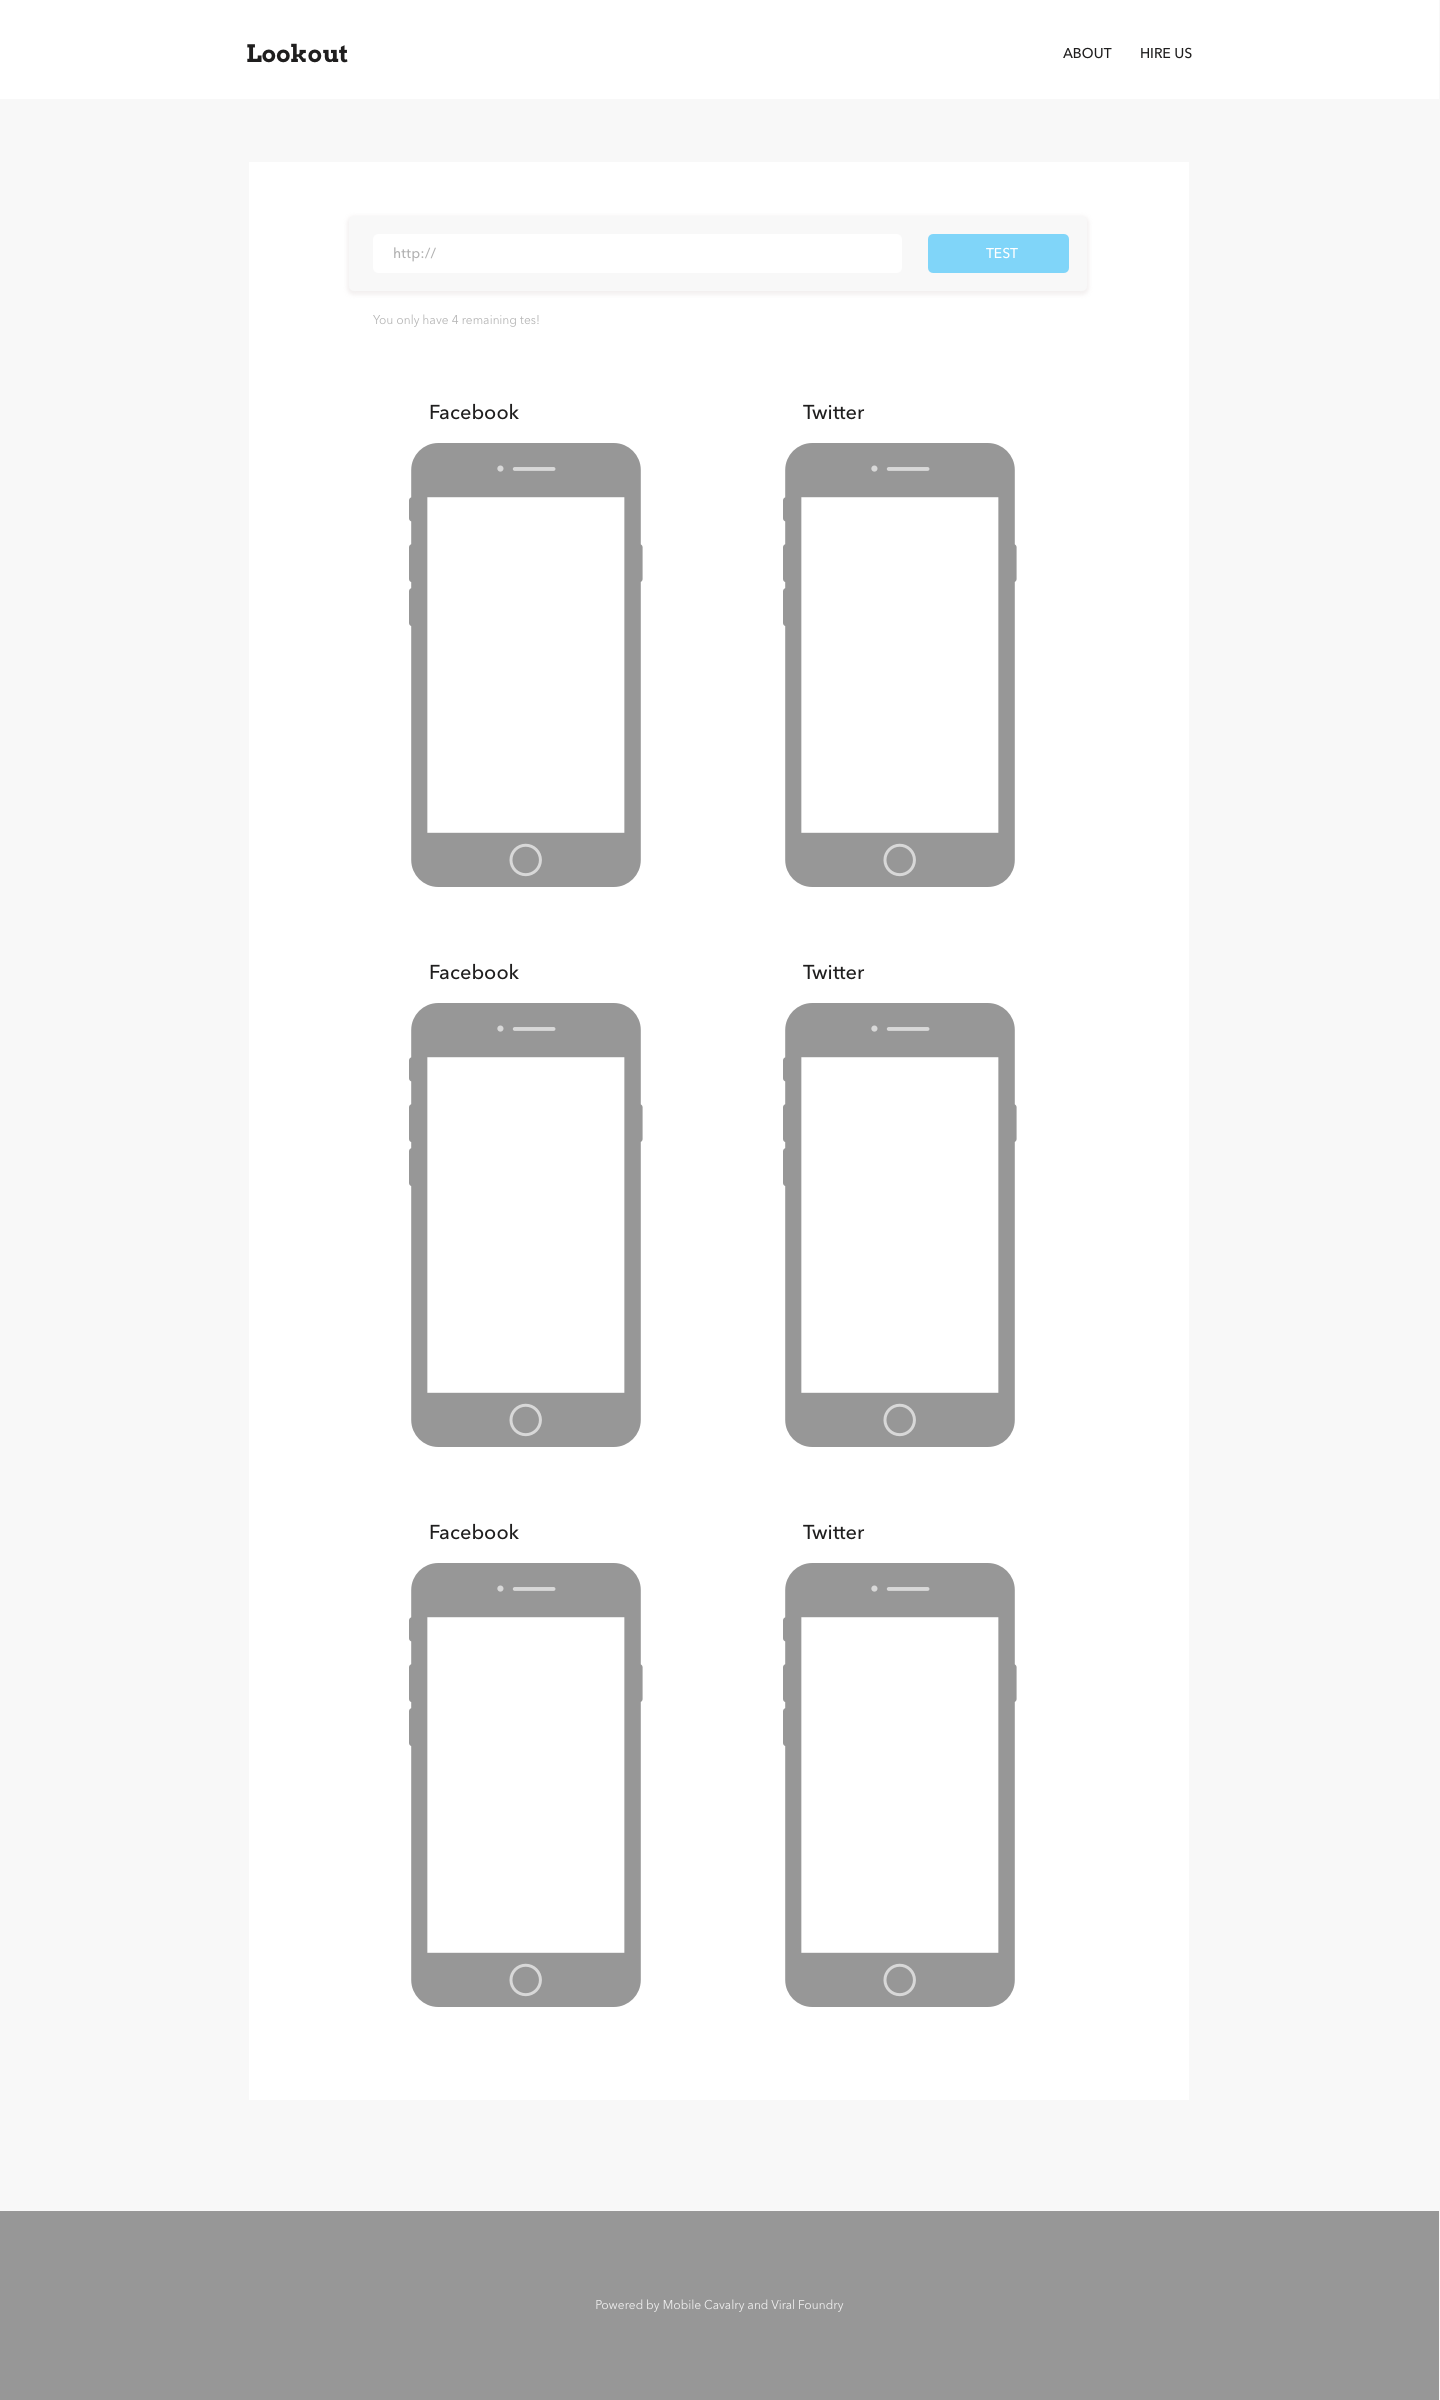 wireframe of lookout result page